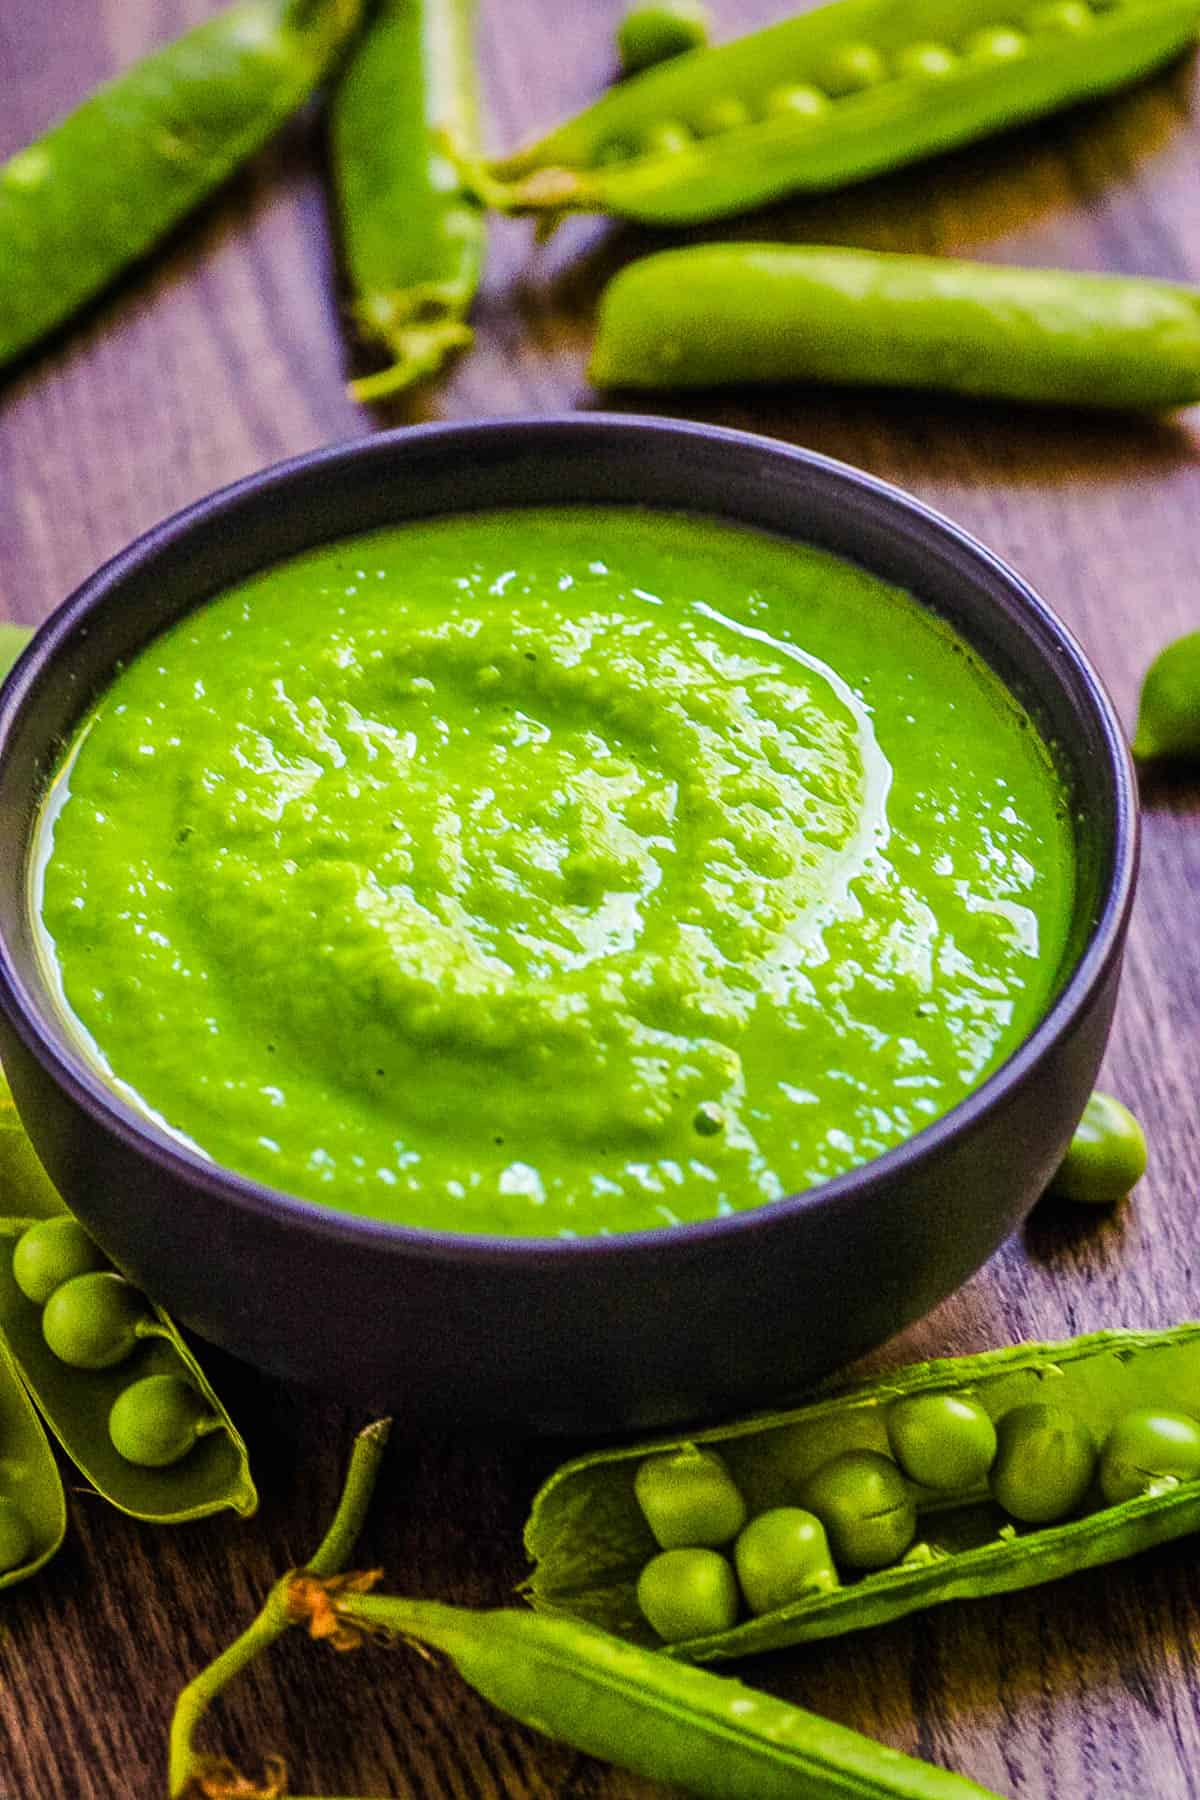 Pea puree for baby in a black serving bowl.